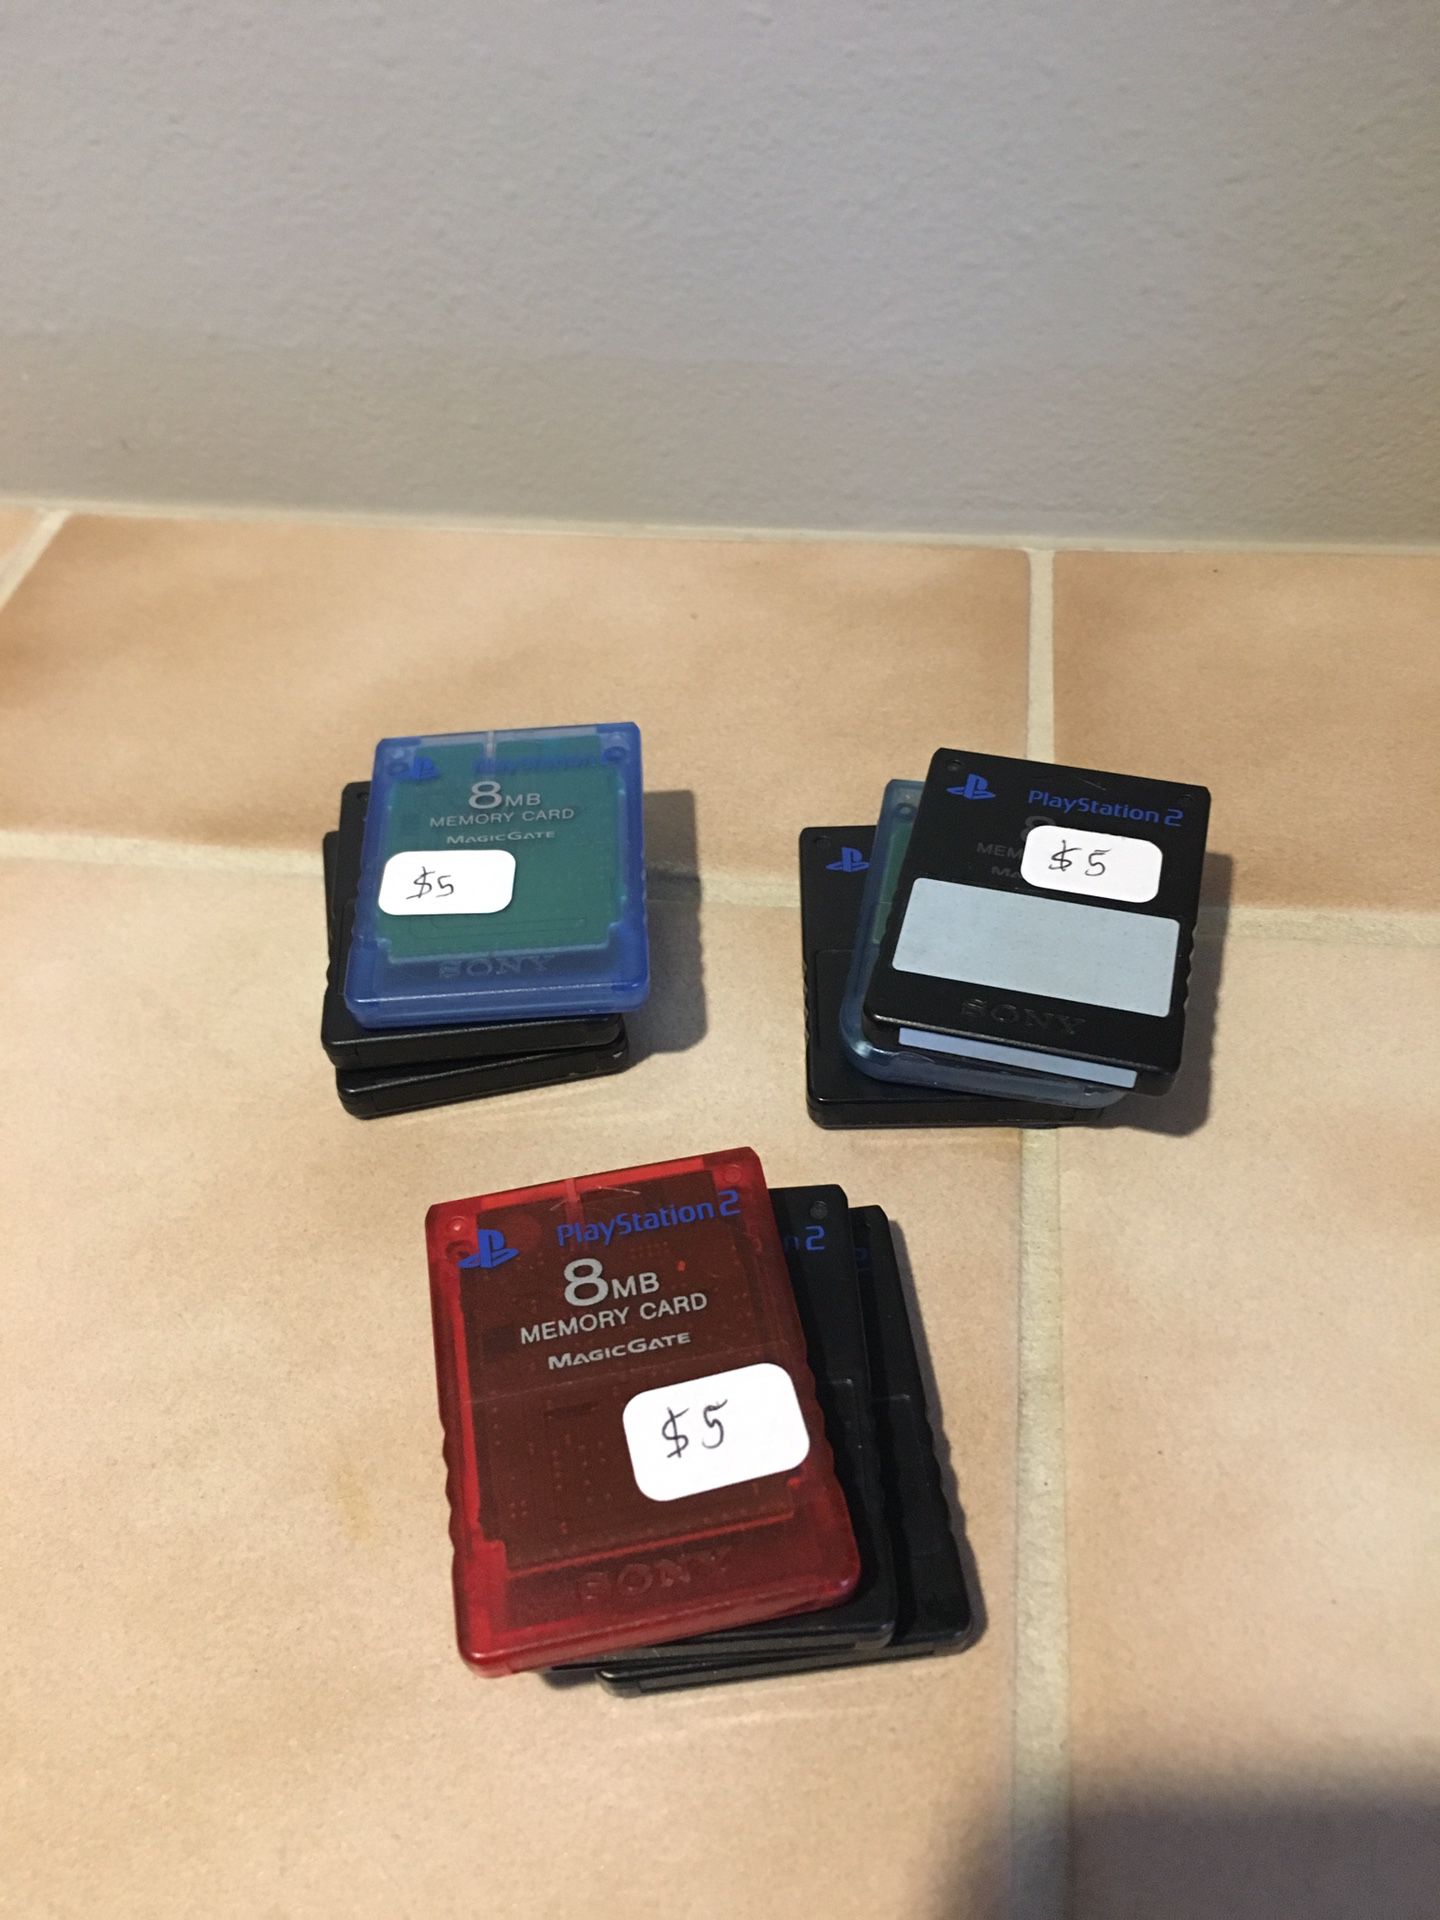 Official PlayStation 1 and 2 memory cards